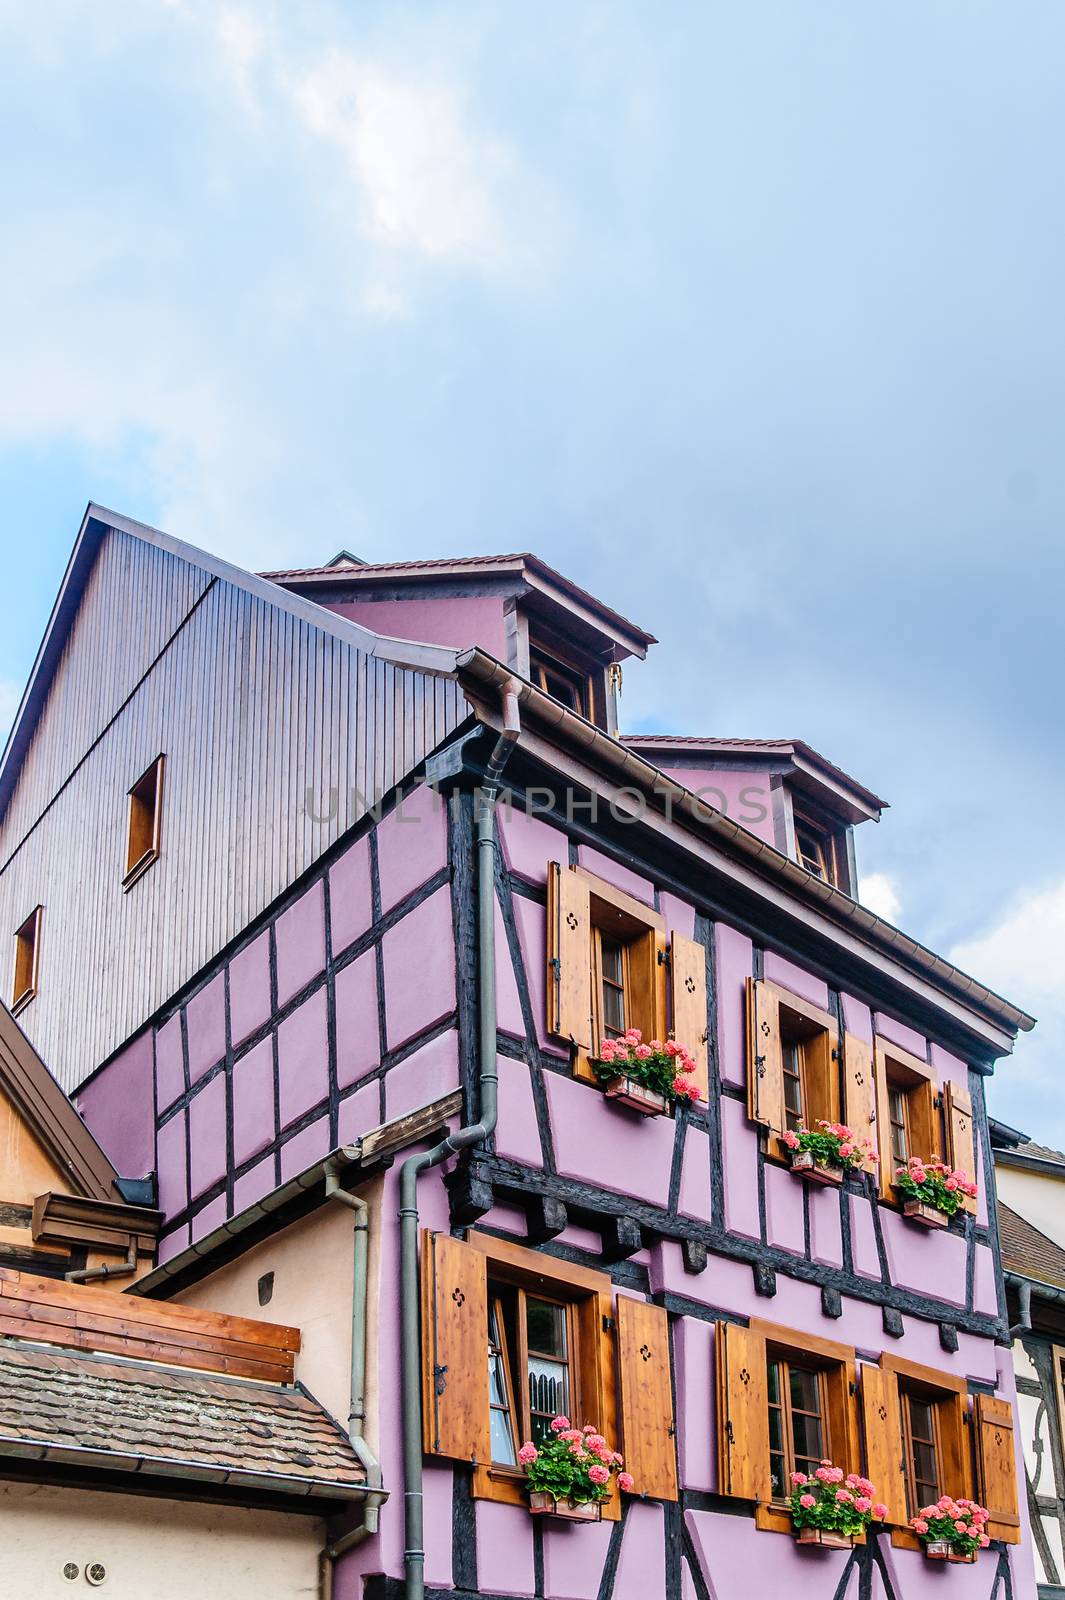 typical Alsace half timbered house, Strasbourg France